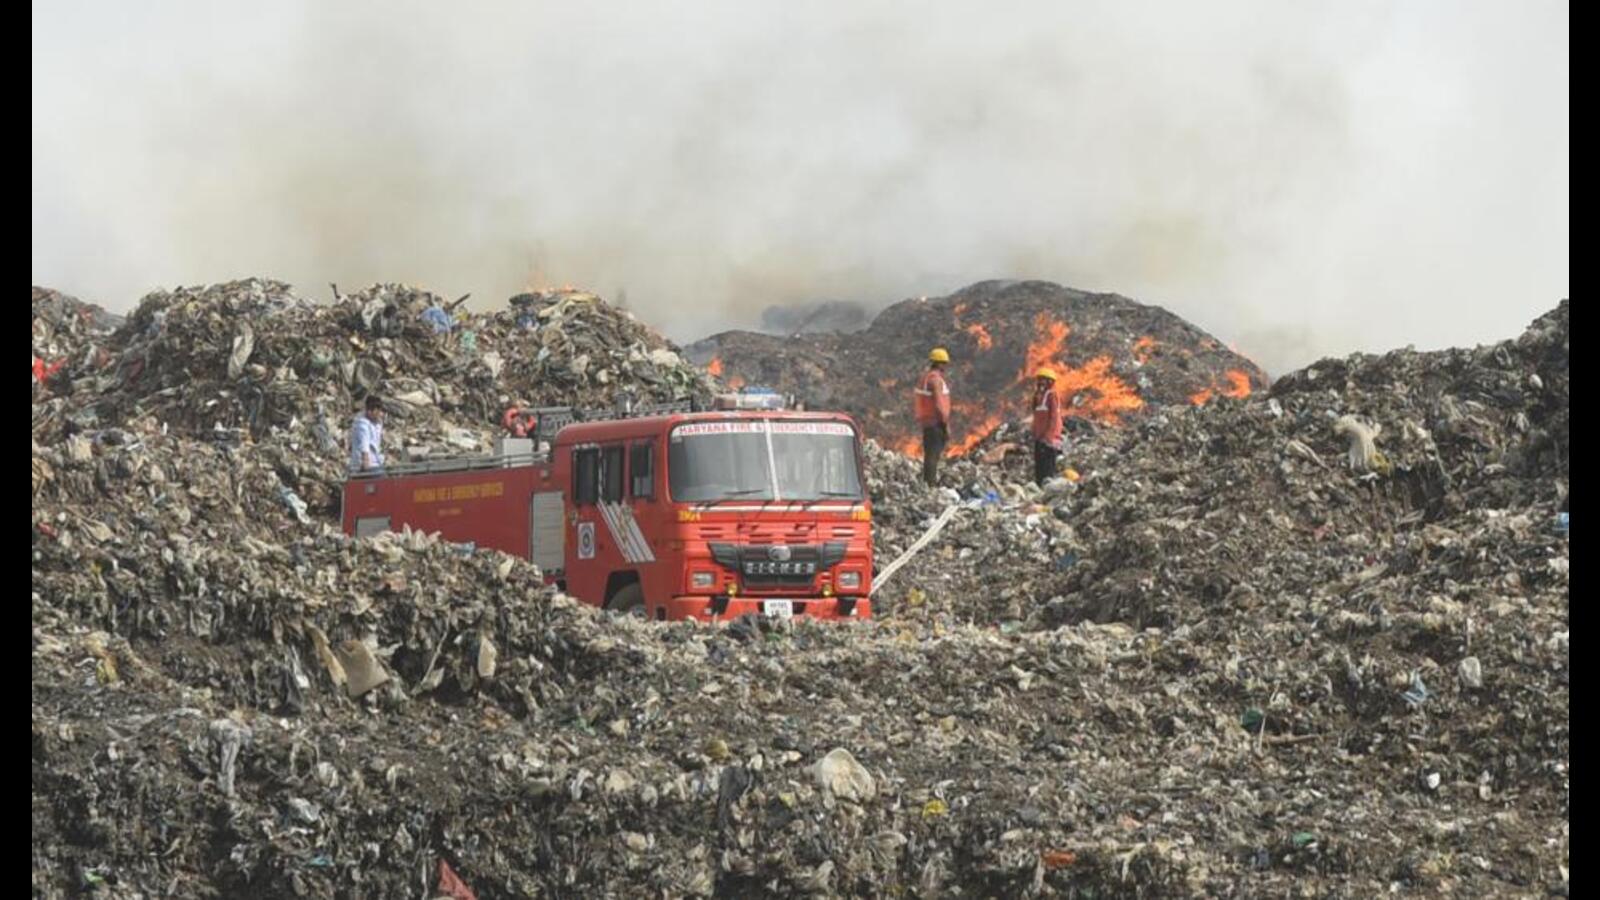 Fire breaks out at Bandhwari landfill, ninth such blaze at site this year